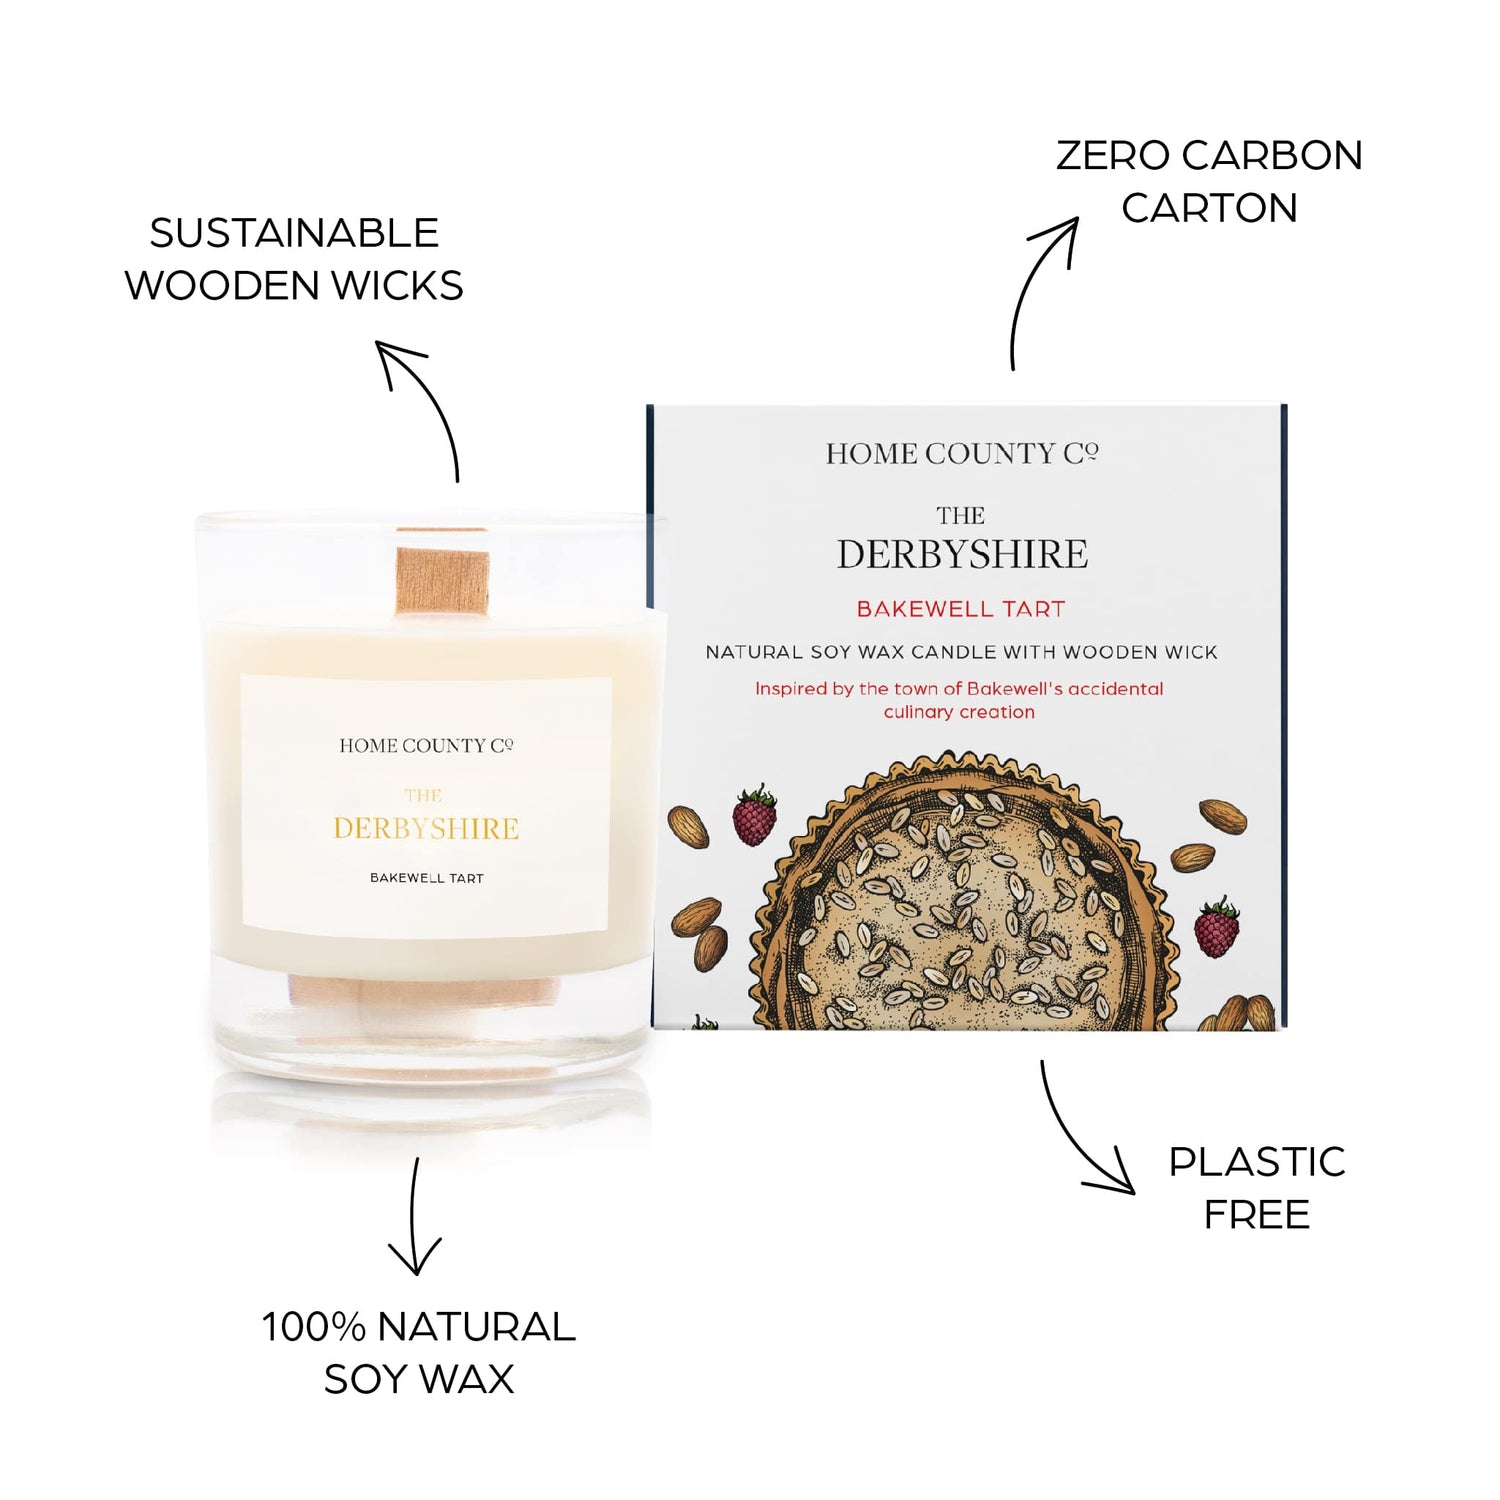 Sustainable candle credentials are shown around the bakewell tart scented candle image - sustainable wooden wicks, zero carbon carton, 100% natural soy wax, plastic free